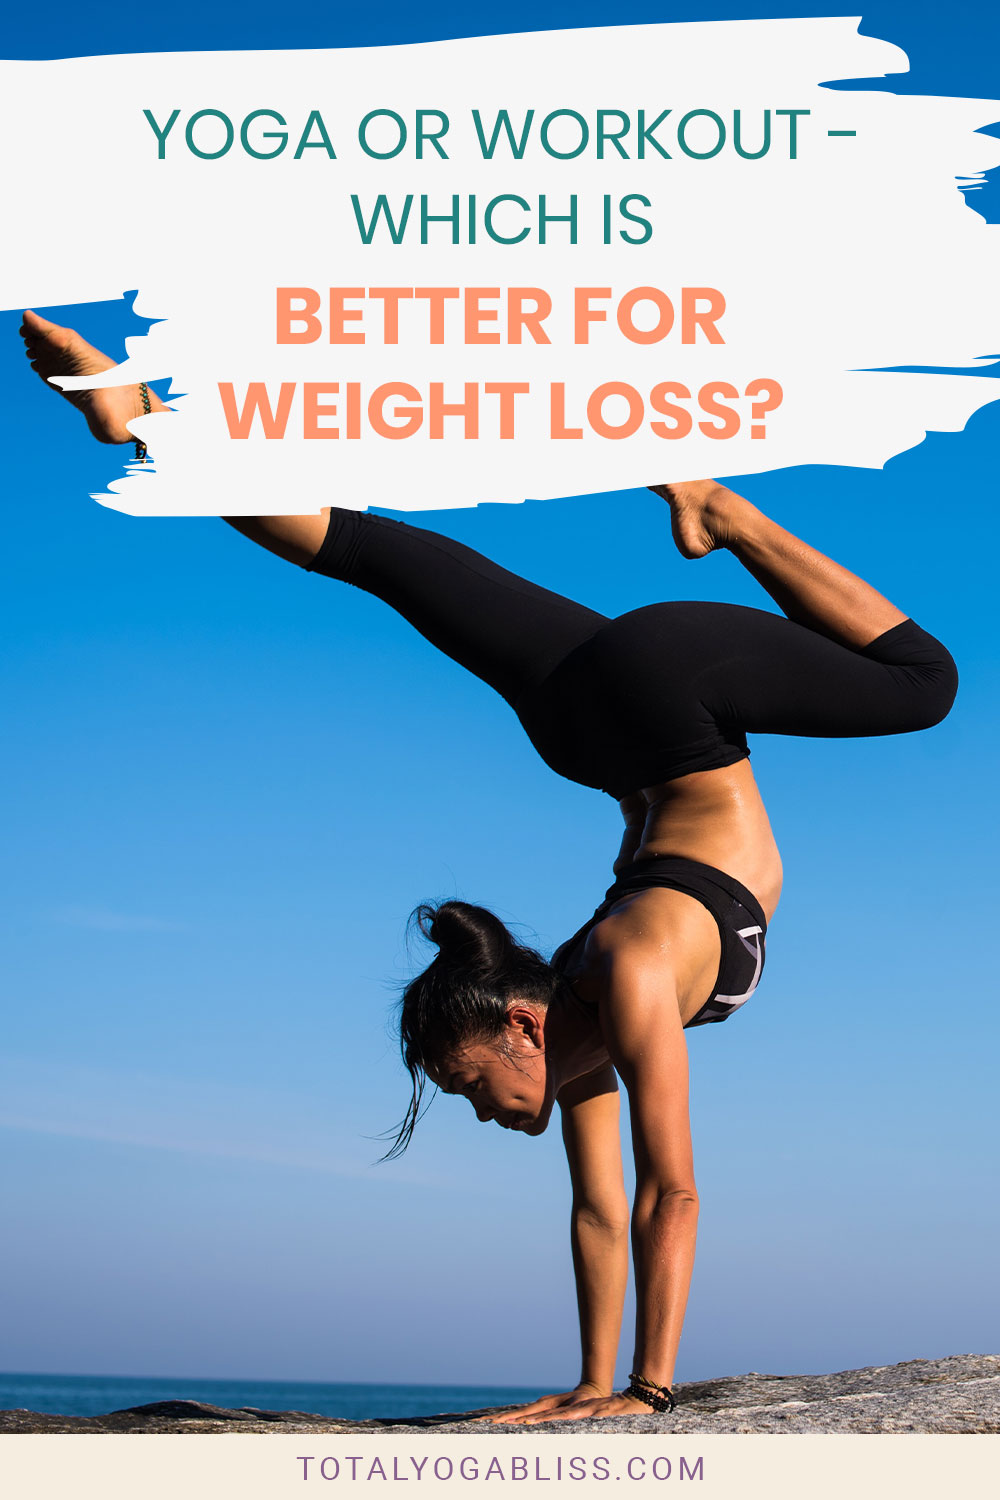 Woman doing inverted yoga pose - Yoga Or Workout - Which Is Better For Weight Loss?